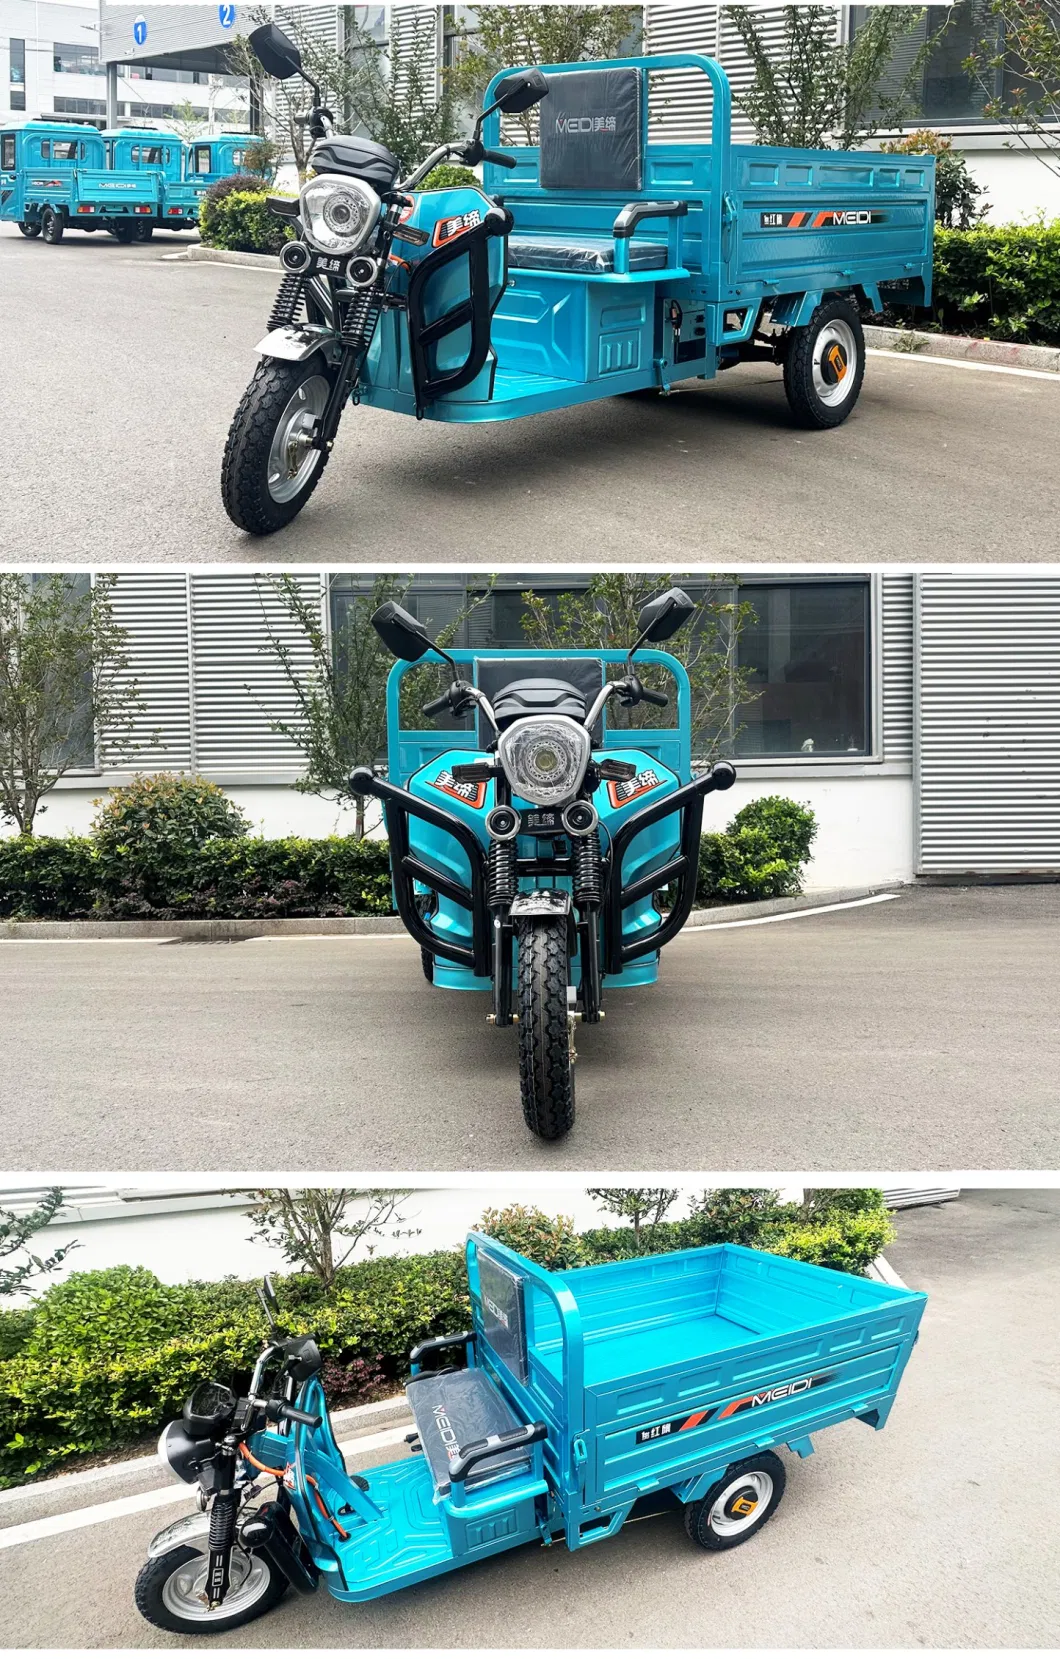 Meidi Human Loader 3 Wheeled Motorcycle Agricultural Cargo Tricycle Motor Trike Electric Vehicle with Good Price